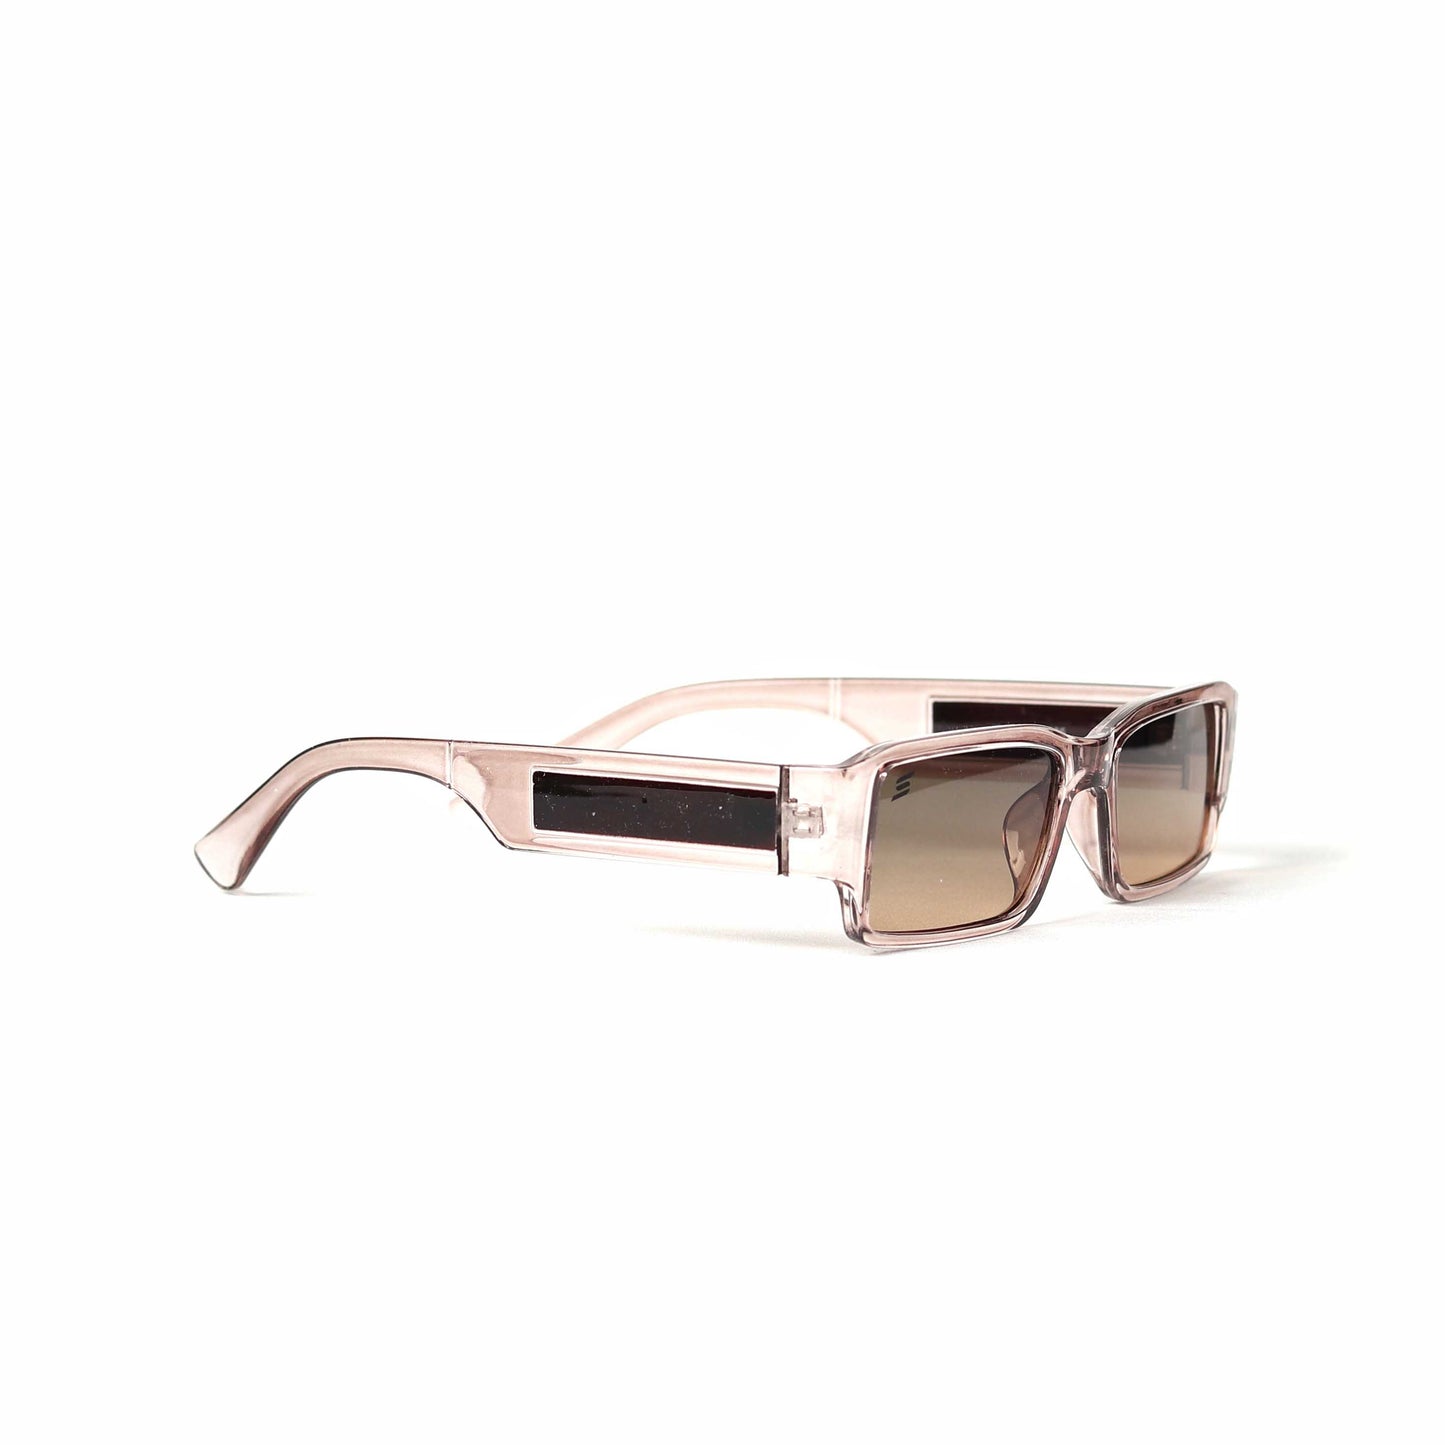 Espiars Rectangle PC shades (brown)